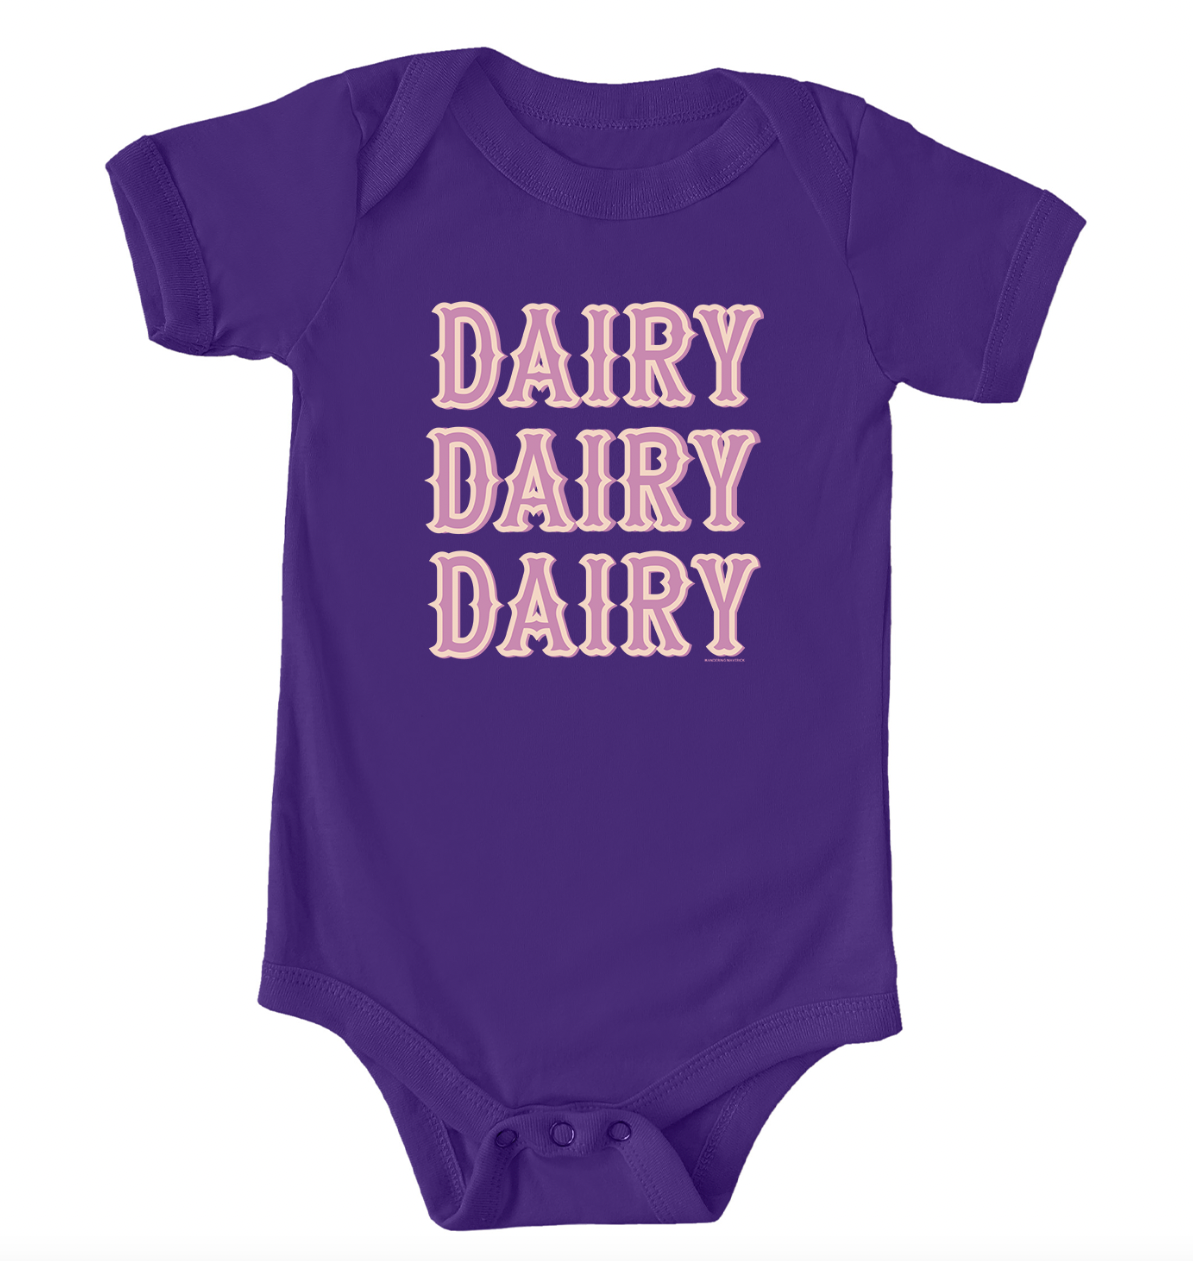 Western Dairy One Piece/T-Shirt (Newborn - Youth XL) - Multiple Colors!